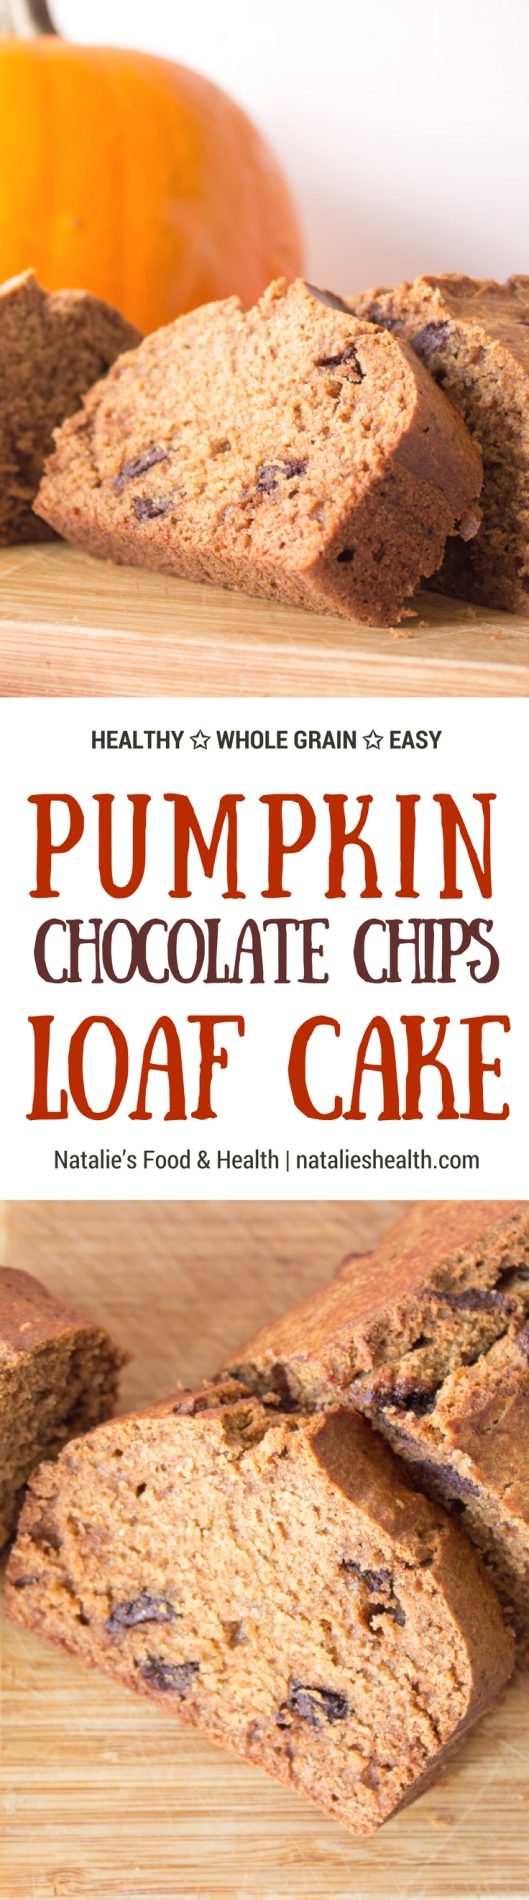 Delicious Pumpkin Loaf Cake made with all HEALTHY wholesome ingredients, packed with aromatic autumn spices - cinnamon, nutmeg, allspice and tons of sweet pumpkin flavor. #healthy #wholegrain #lowcalorie #skinny #pumpkin #holiday #thanksgiving #kidsfriendly #choocolate #fall #dessert | www.natalieshealth.com